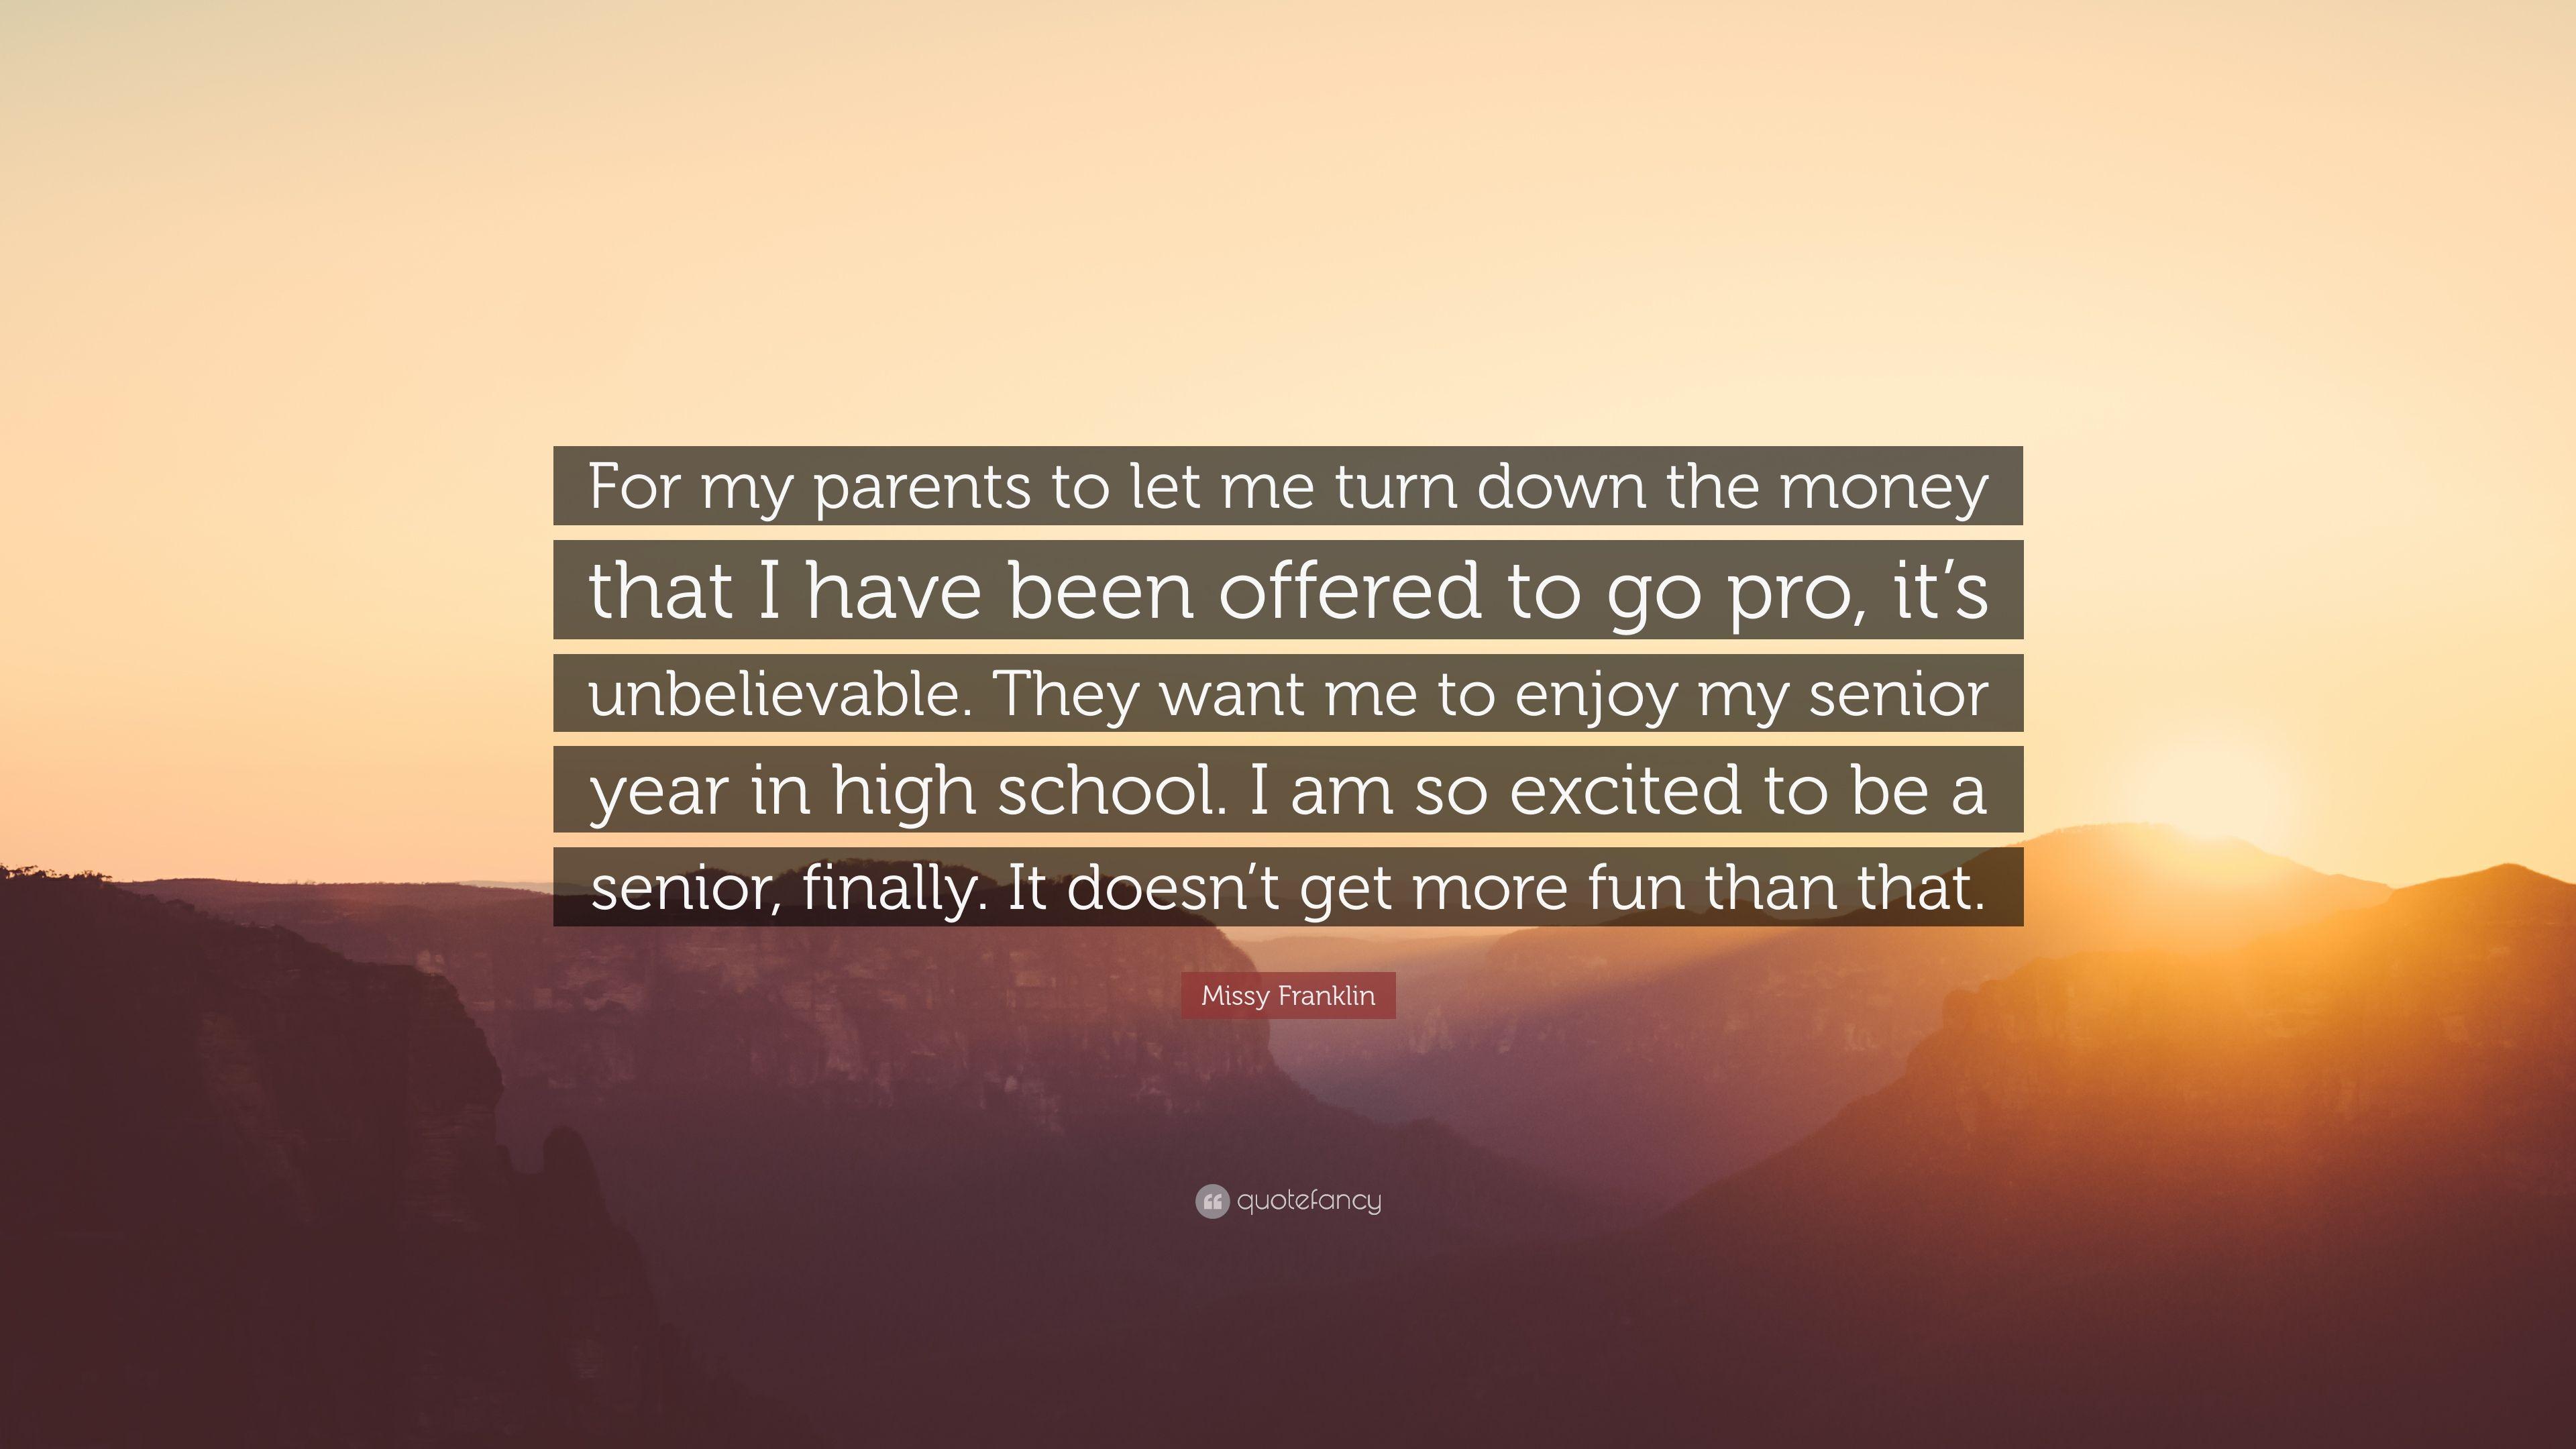 Missy Franklin Quote: “For my parents to let me turn down the money